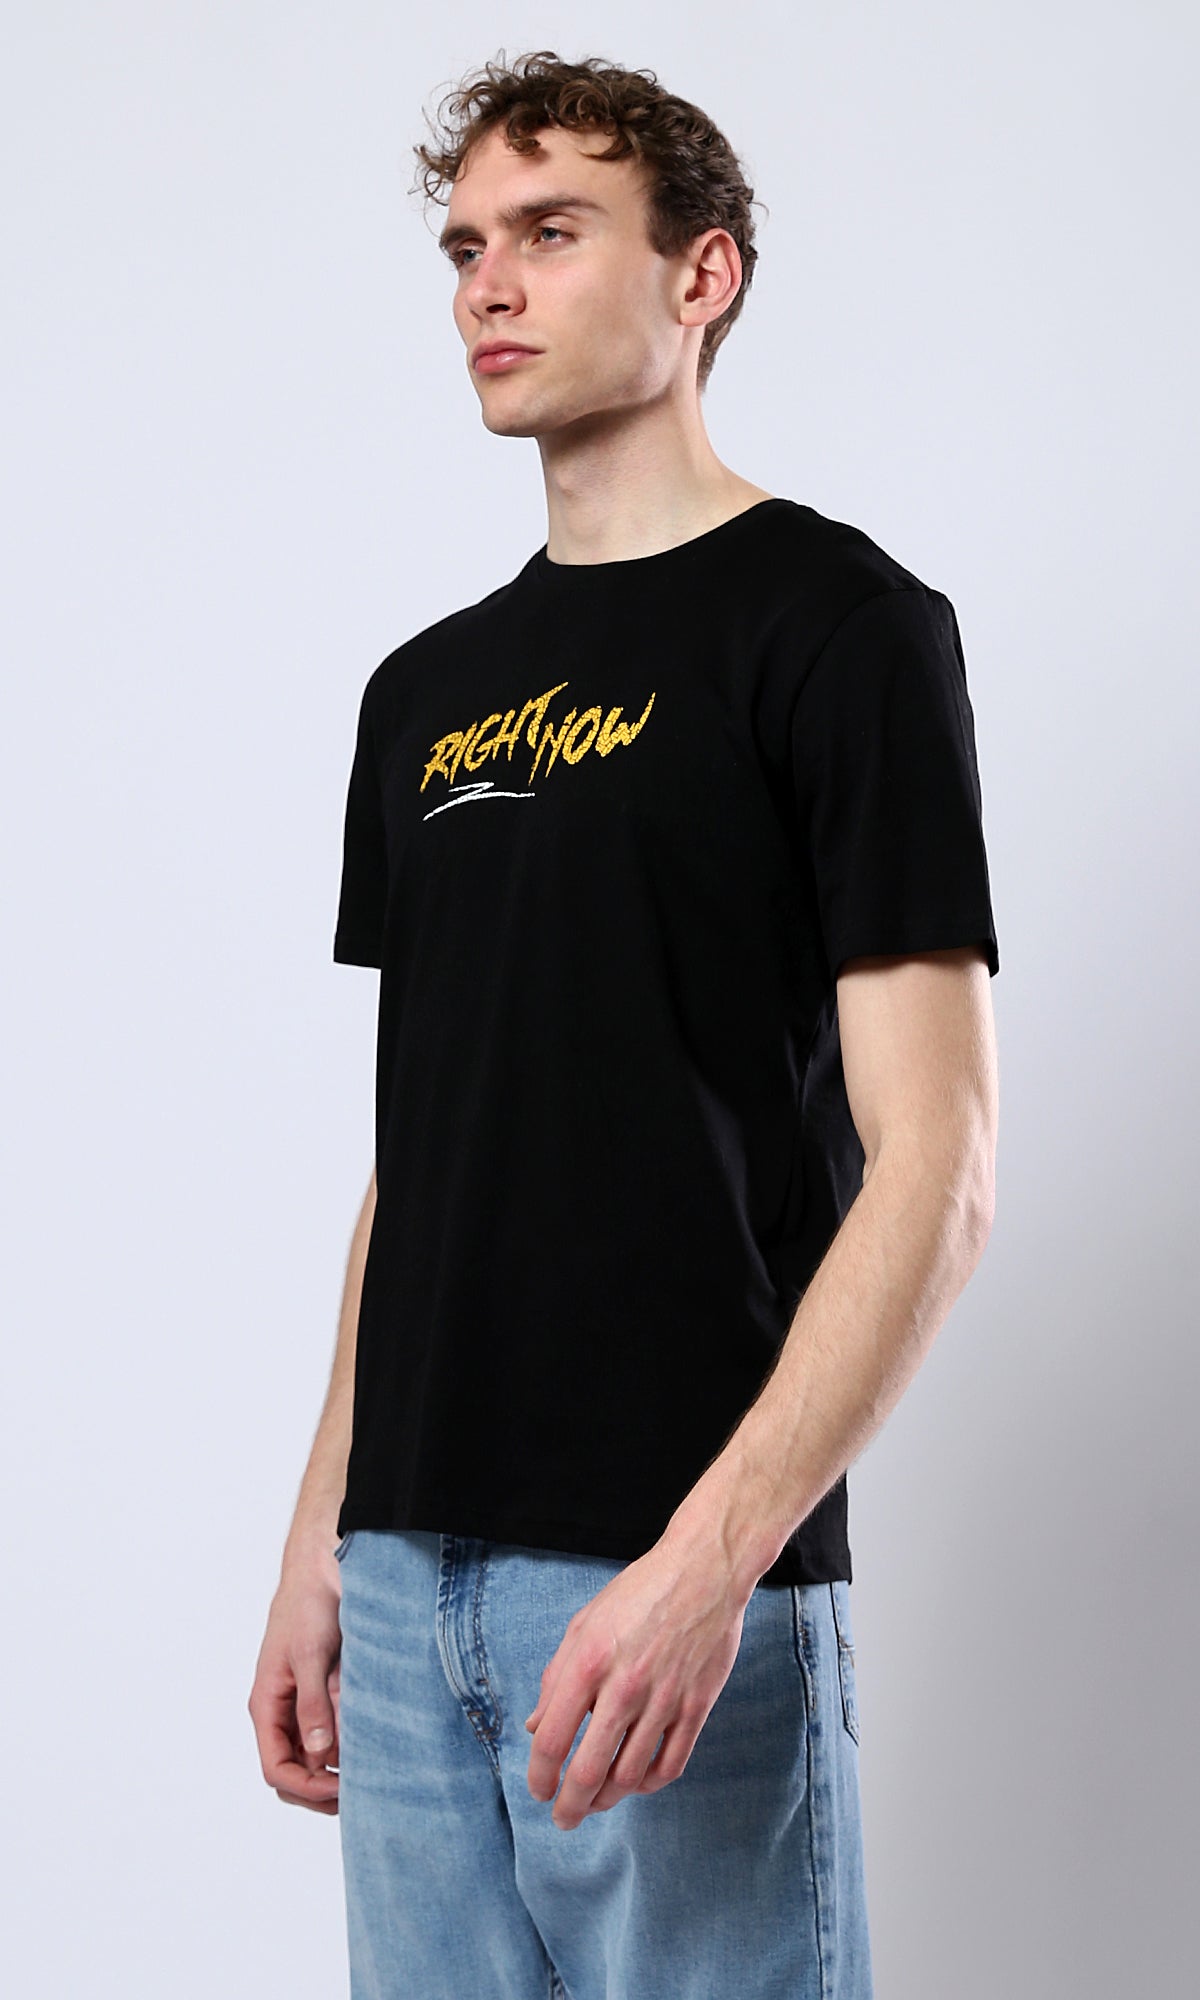 O178911 Printed "Right Now" Black Casual Tee